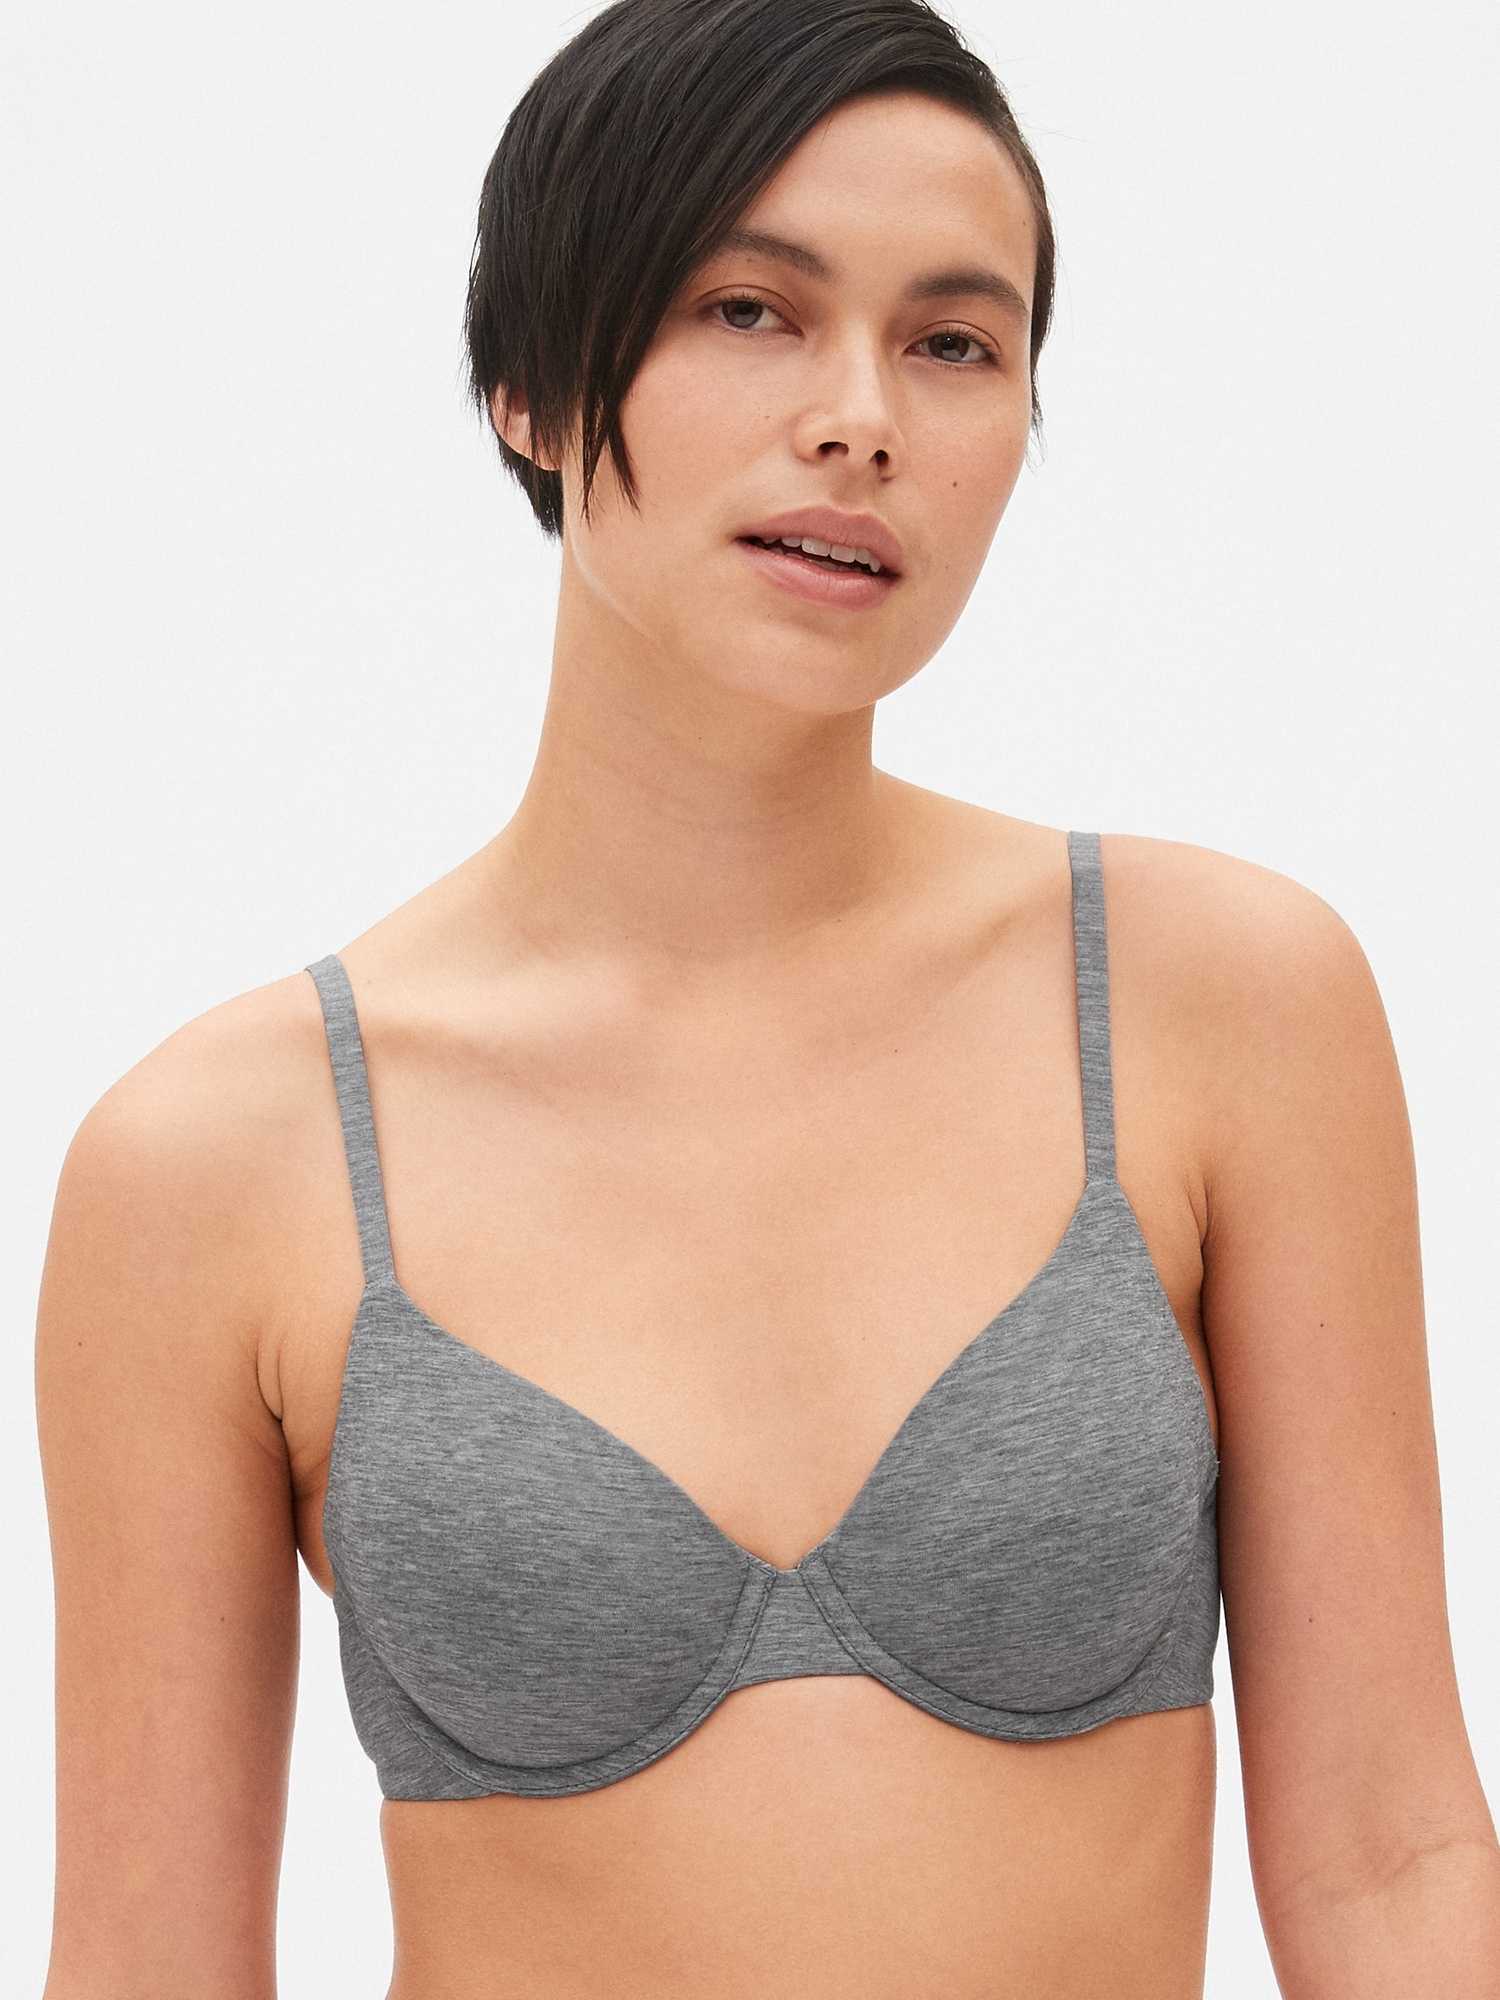 Third Palace napkin best bra for small chest older woman Sequel